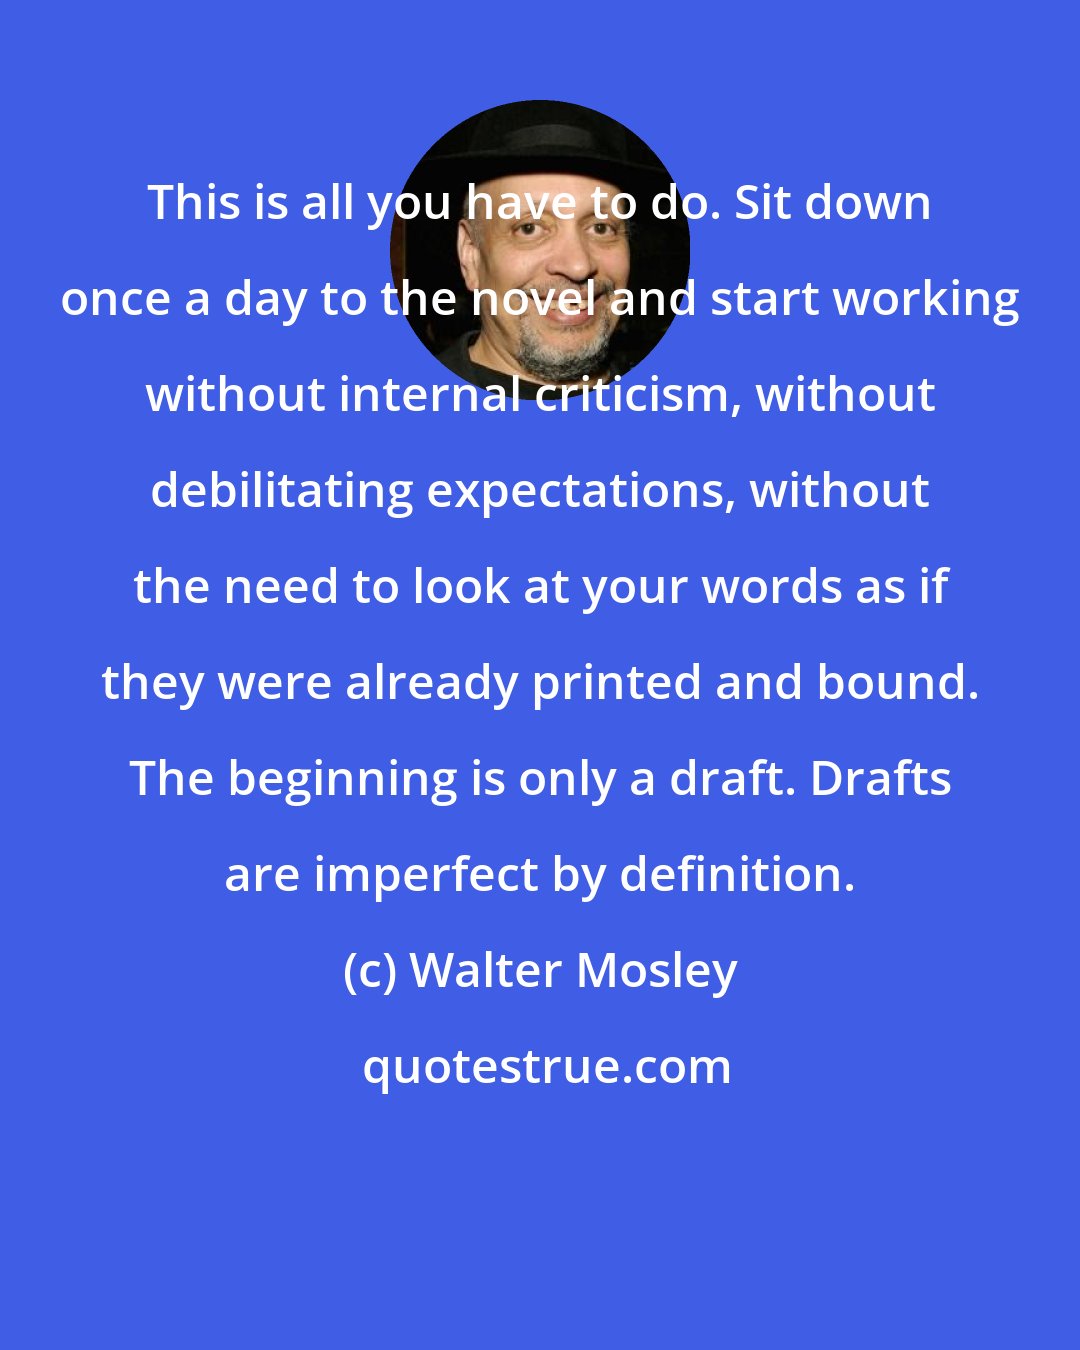 Walter Mosley: This is all you have to do. Sit down once a day to the novel and start working without internal criticism, without debilitating expectations, without the need to look at your words as if they were already printed and bound. The beginning is only a draft. Drafts are imperfect by definition.